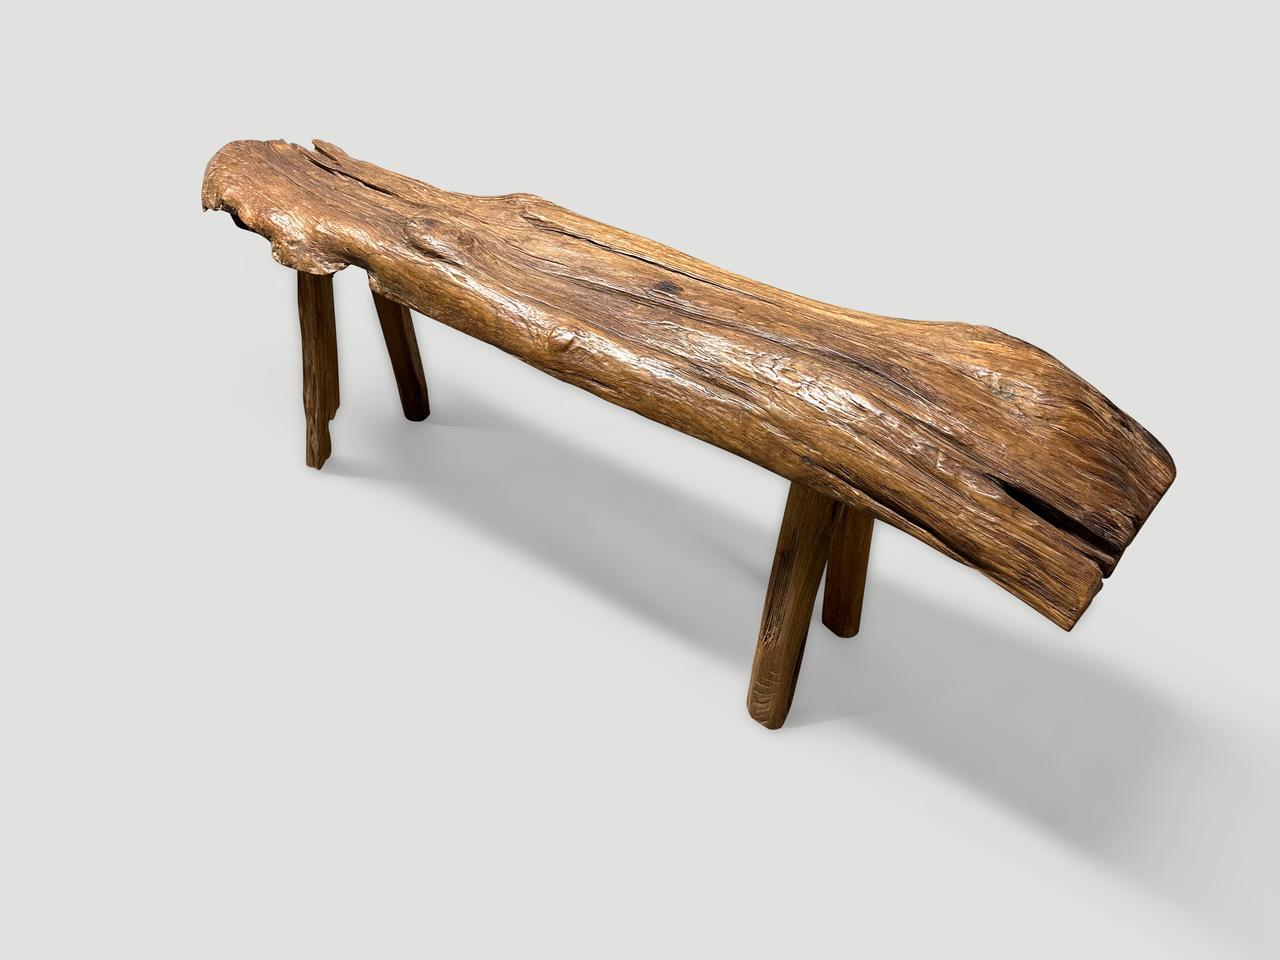 Impressive antique bench with beautiful character and patina. Hand made from a single thick teak log. Circa 1950.

This bench was hand made in the spirit of Wabi-Sabi, a Japanese philosophy that beauty can be found in imperfection and impermanence.